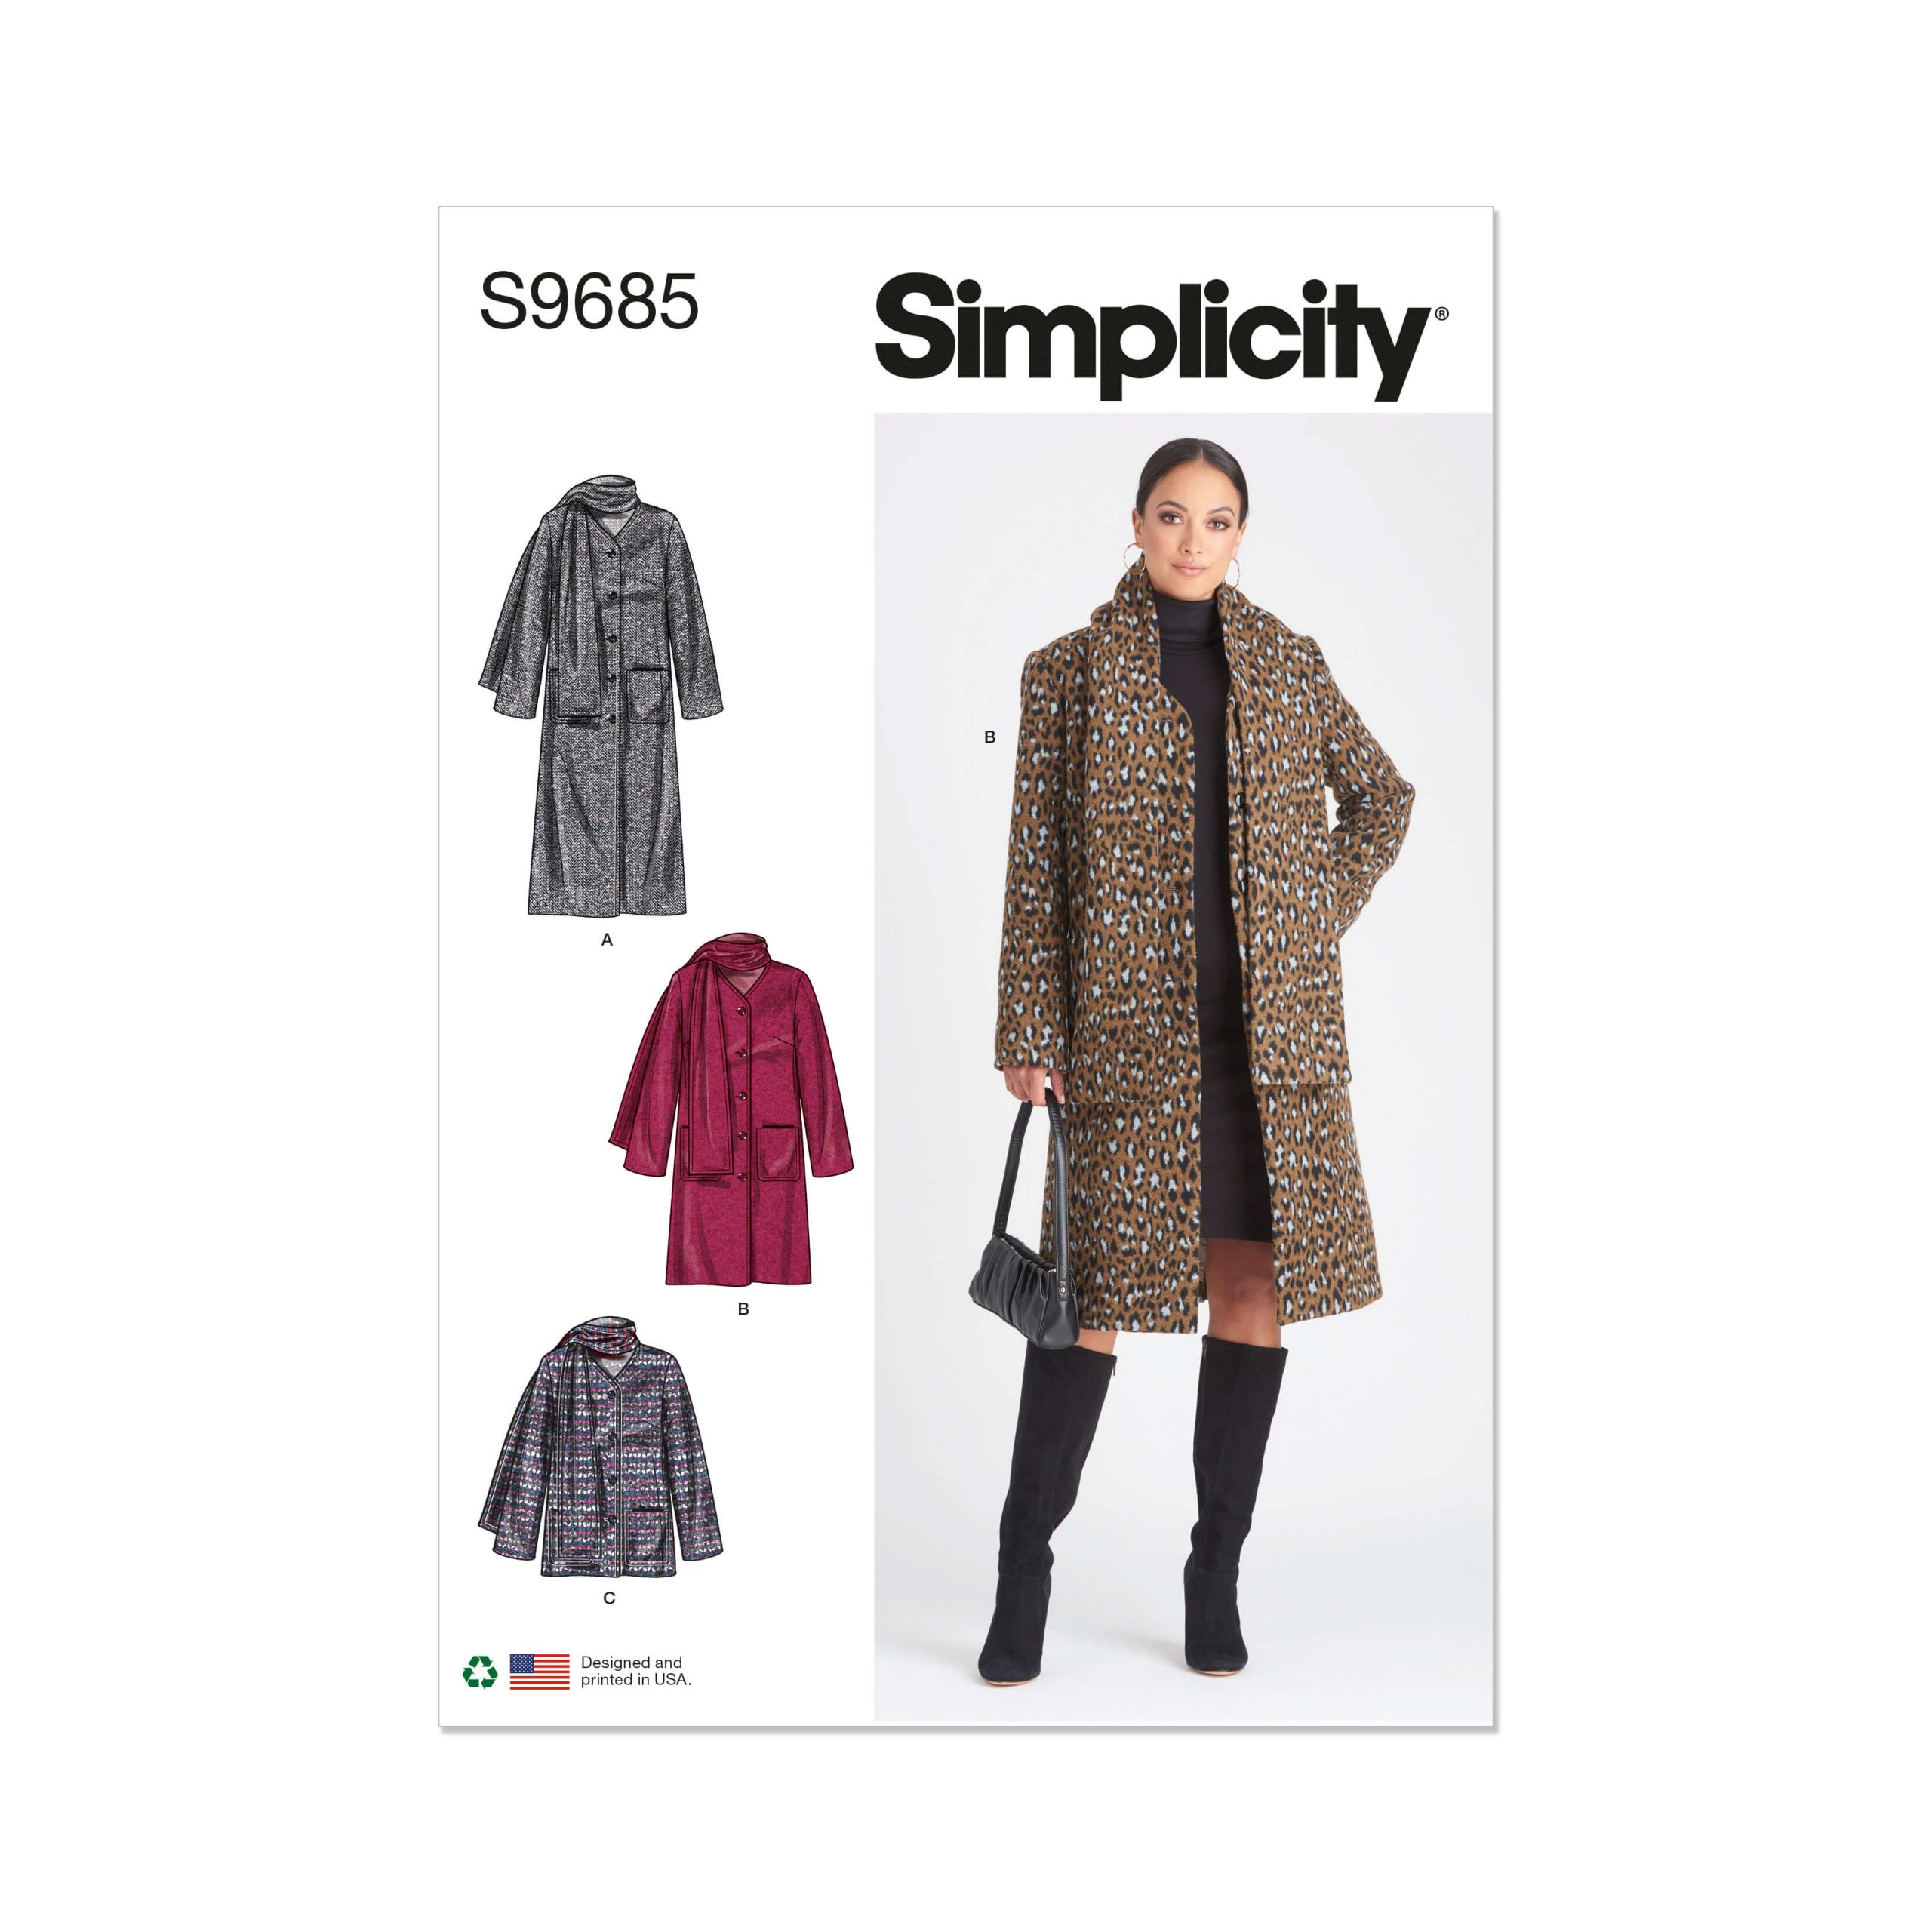 Simplicity Sewing Pattern S9685 Misses' Coat and Jacket